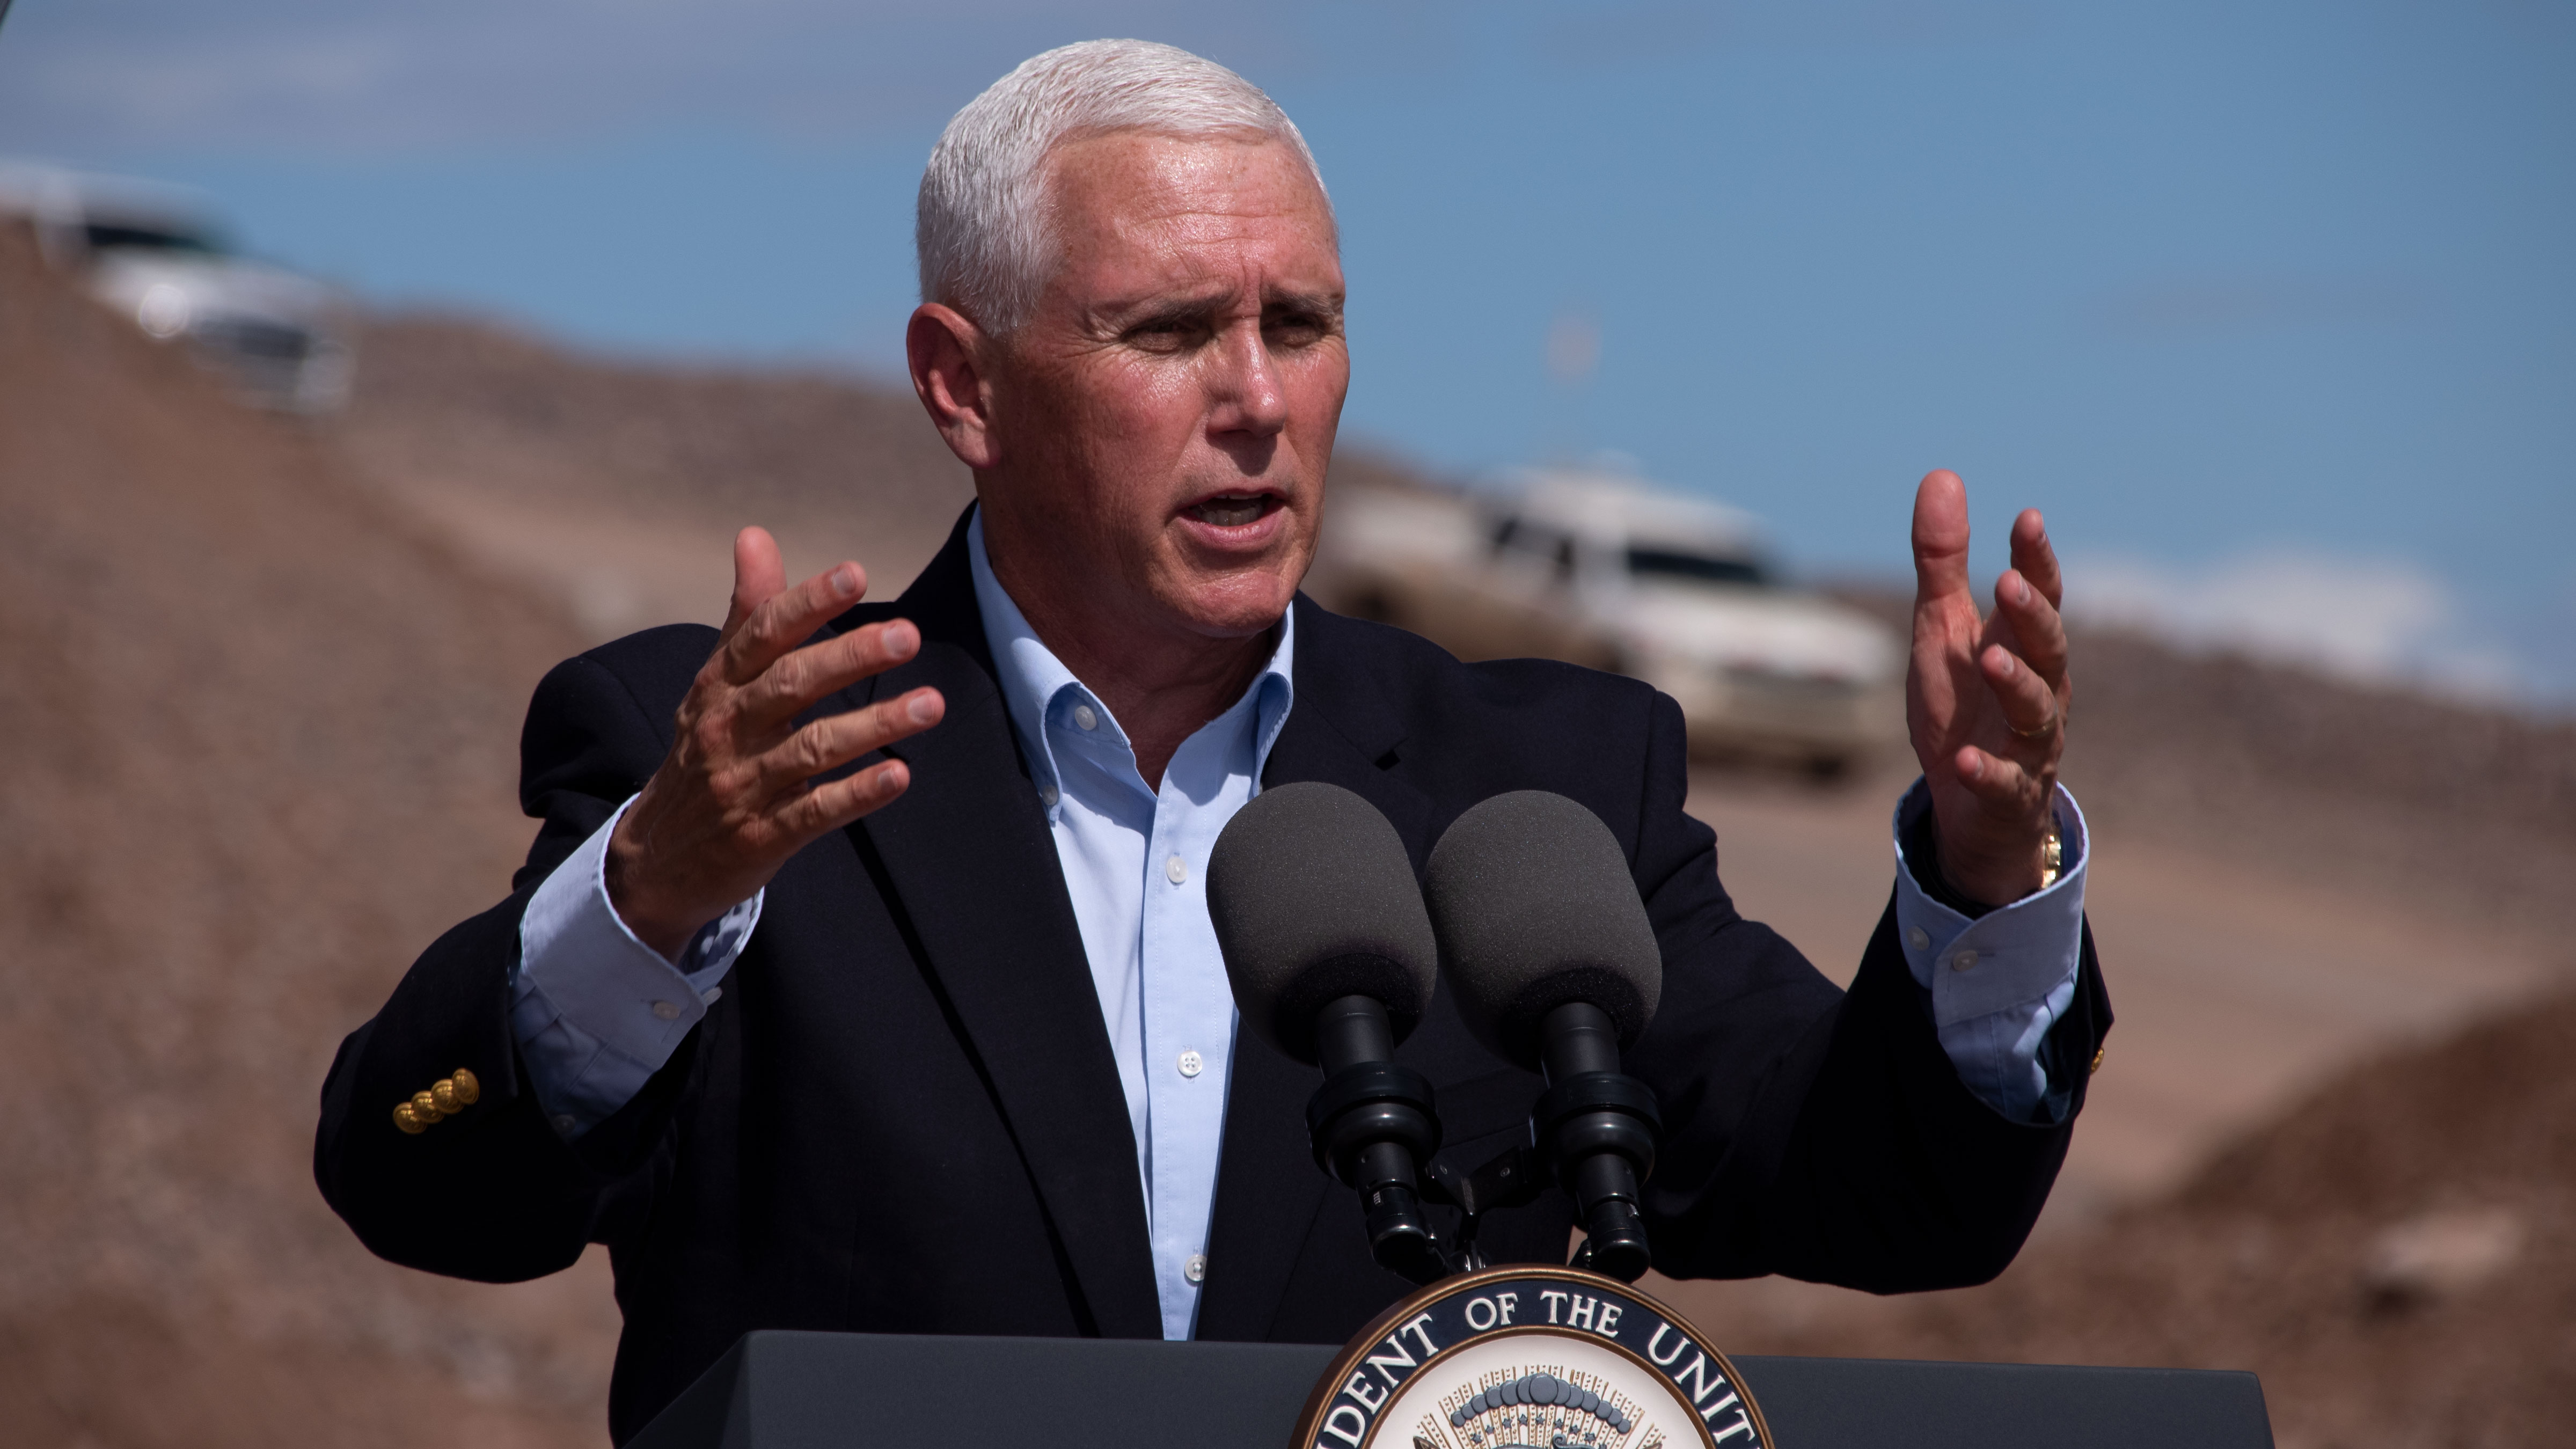 Vice President Mike Pence speaks at the Caterpillar facility in Green Valley. October 3, 2019